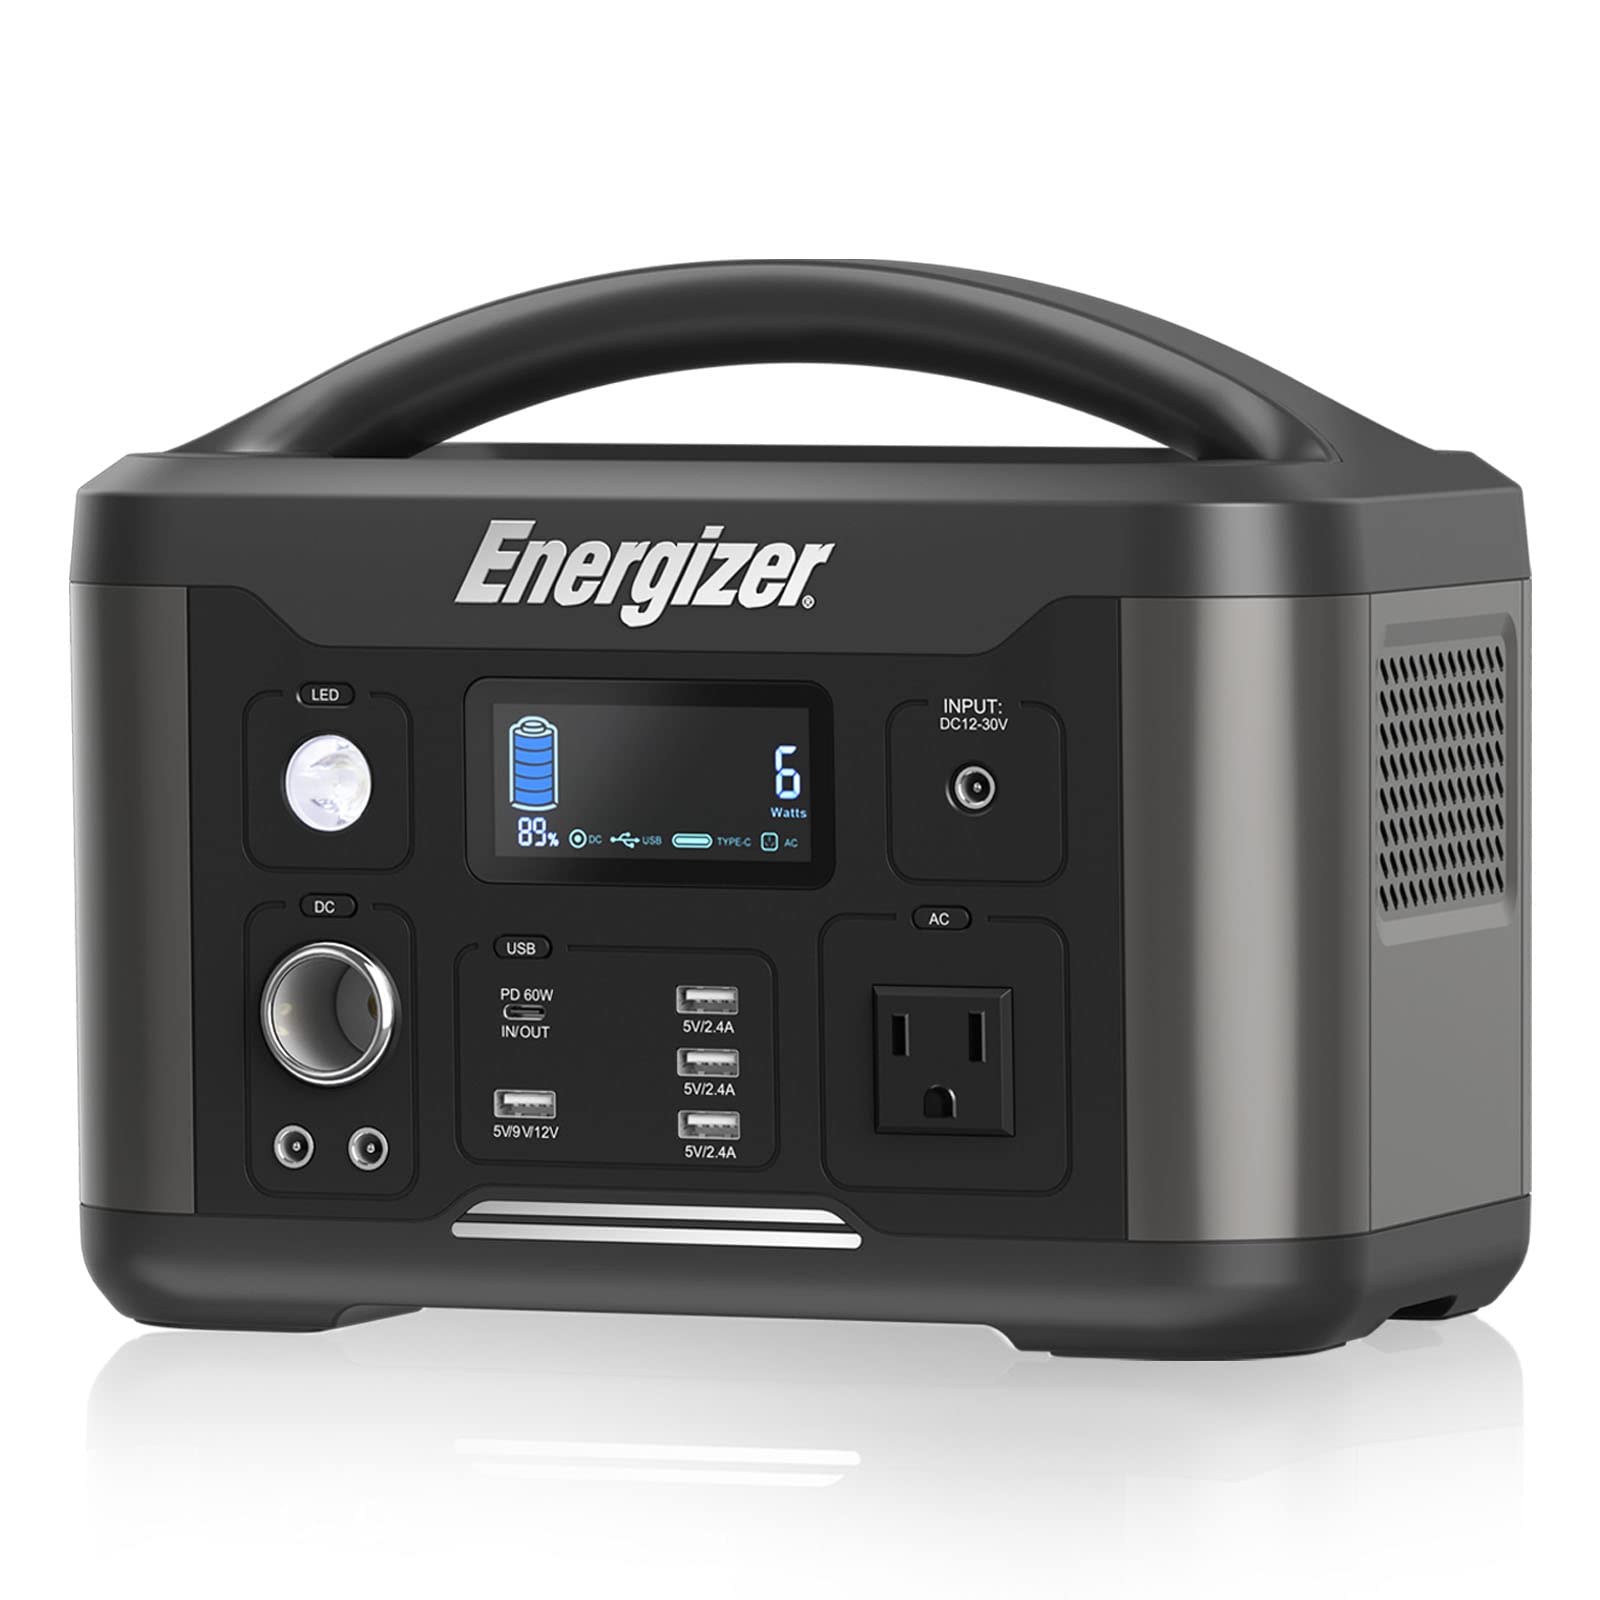 Energizer Portable Power Station PPS700 626Wh Battery 110V/600W Backup Lithium Battery, 110V/600W Pure Sine Wave AC Outlet, Solar Generator for Outdoors Camping Travel Hunting Blackout